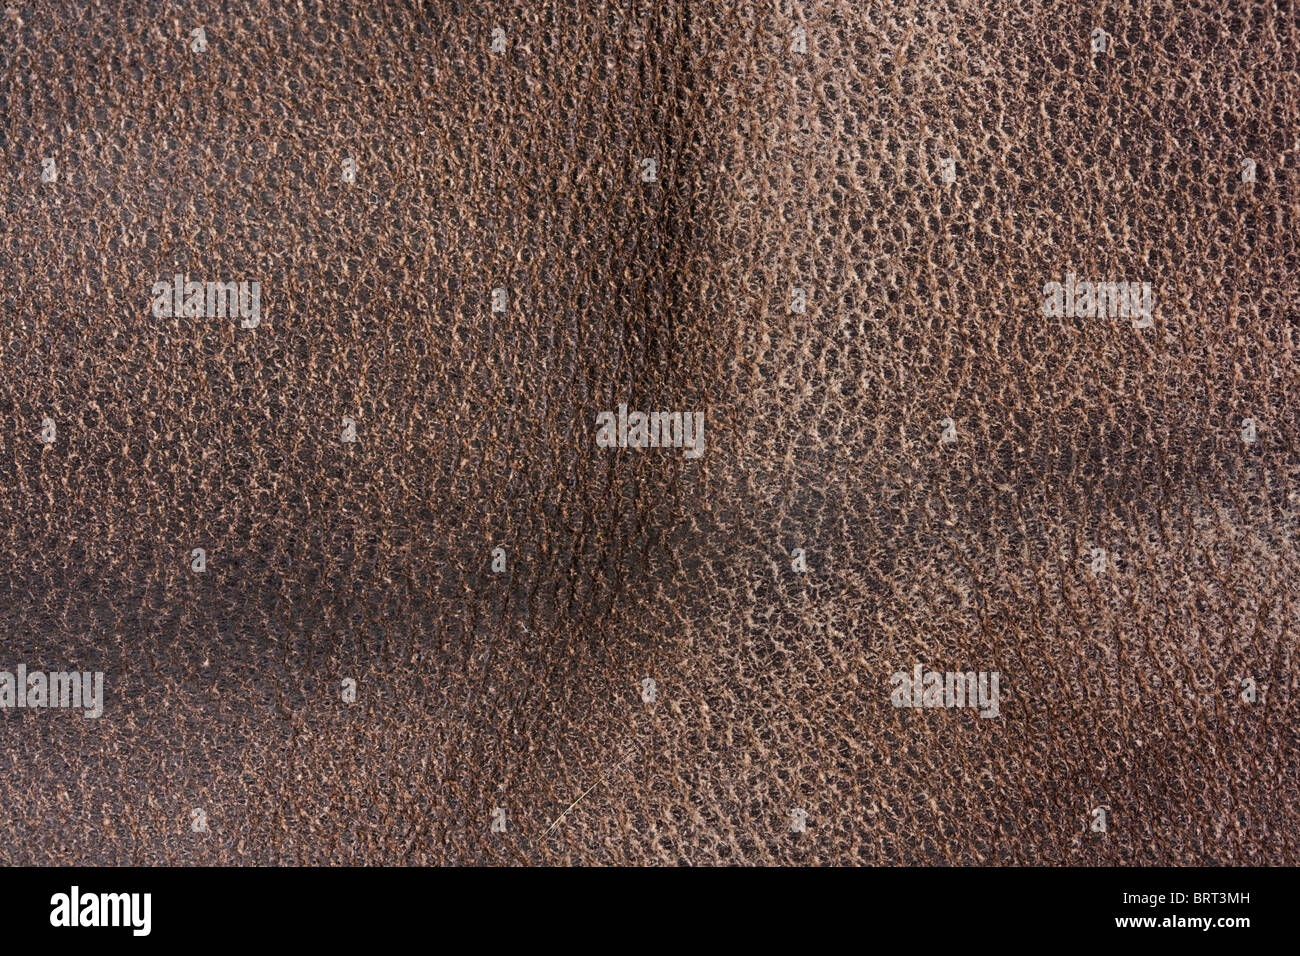 brown leather texture background Stock Photo